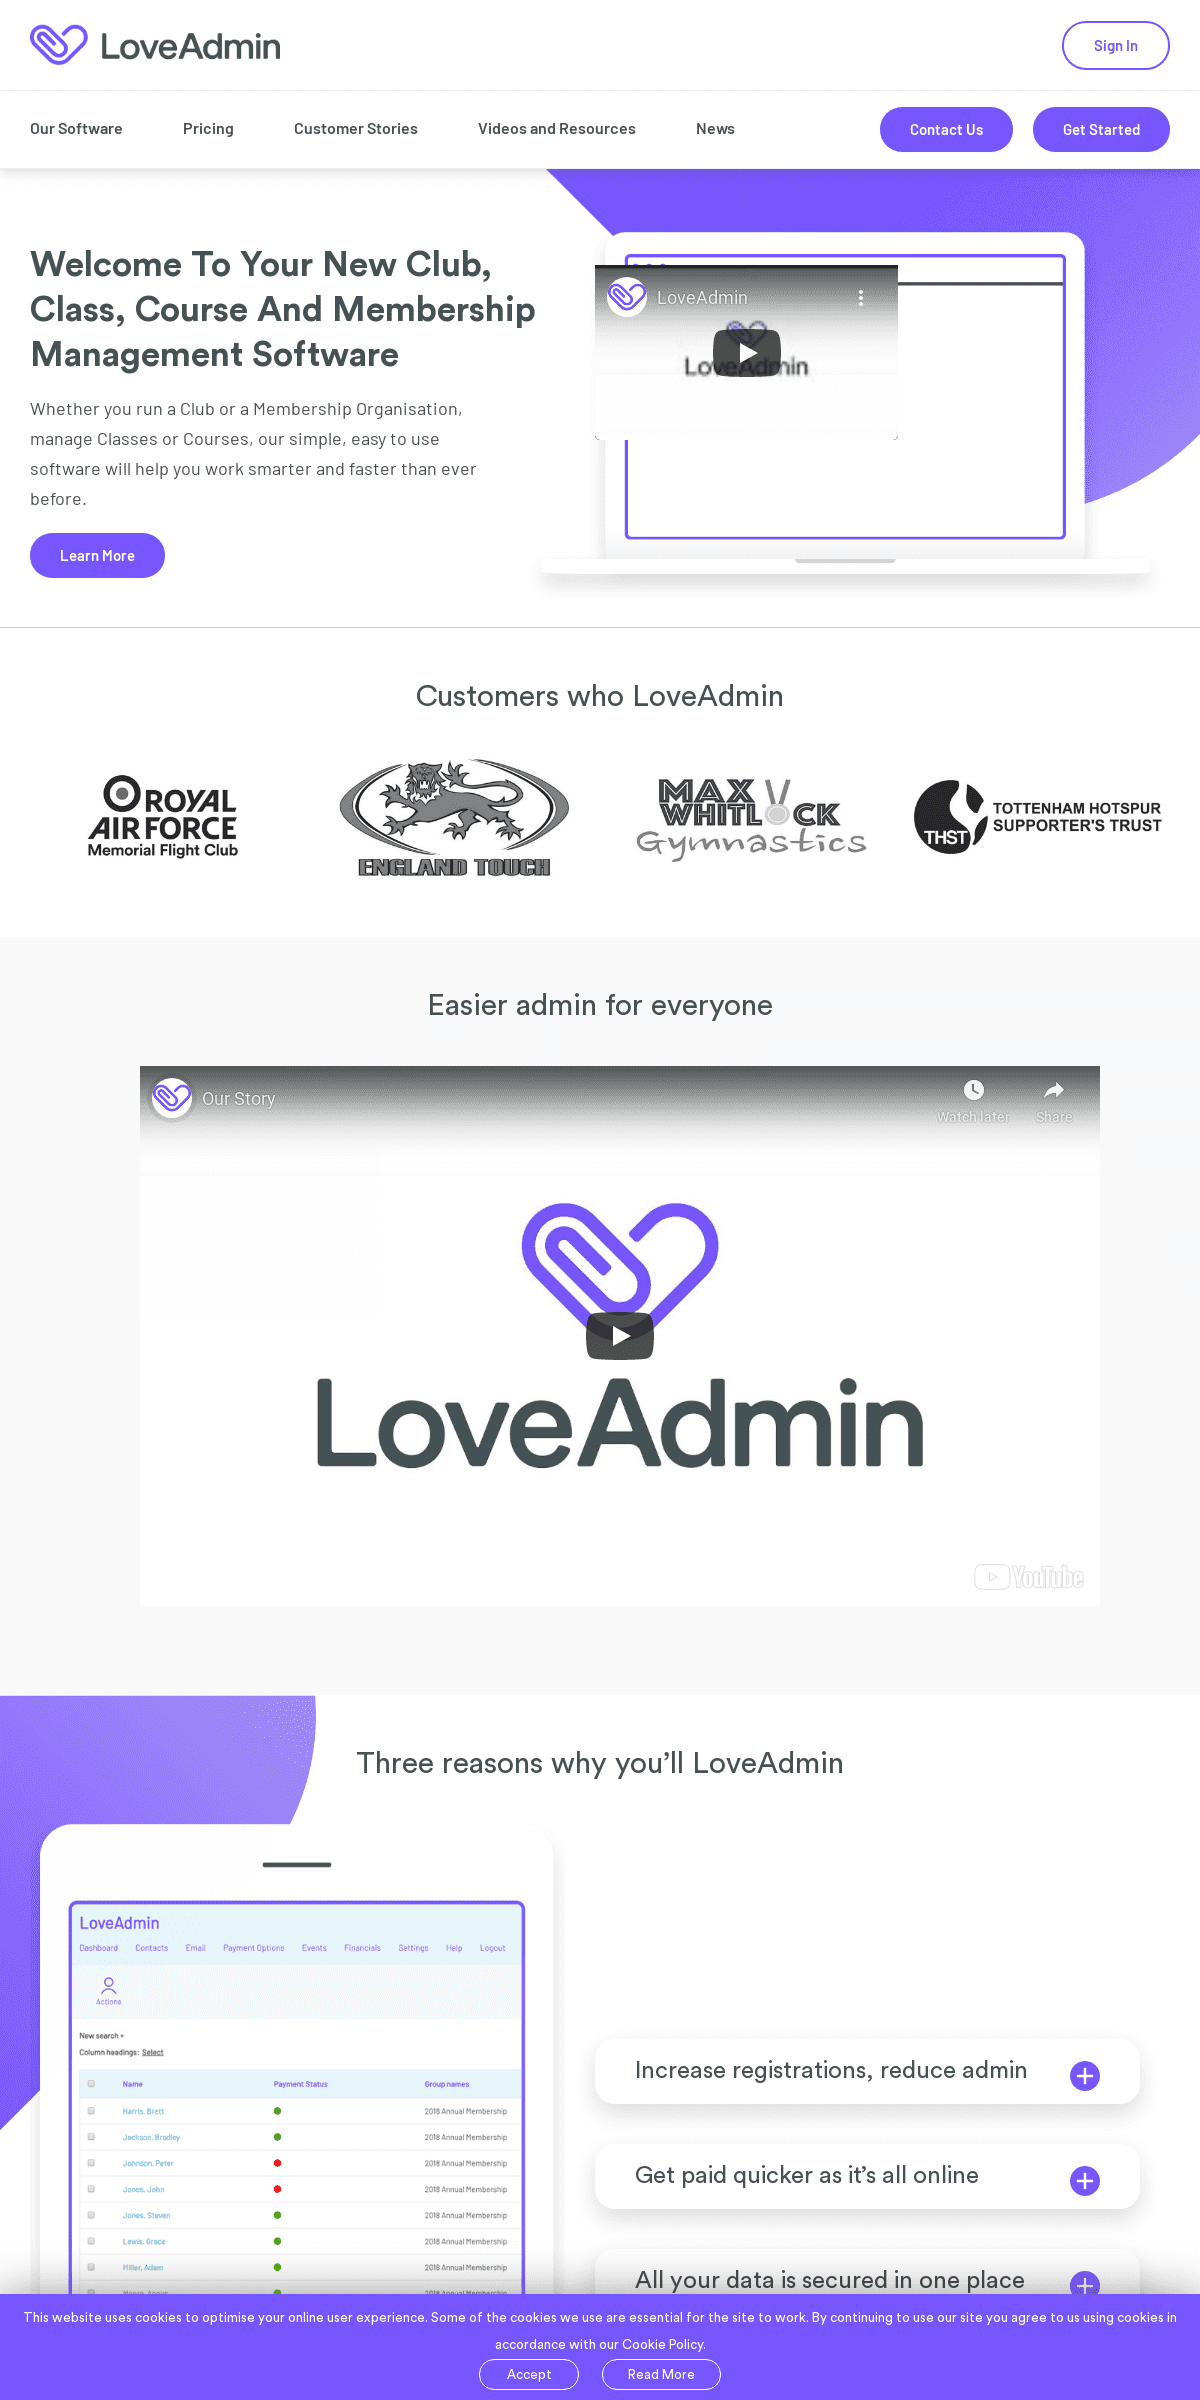 A complete backup of loveadmin.com